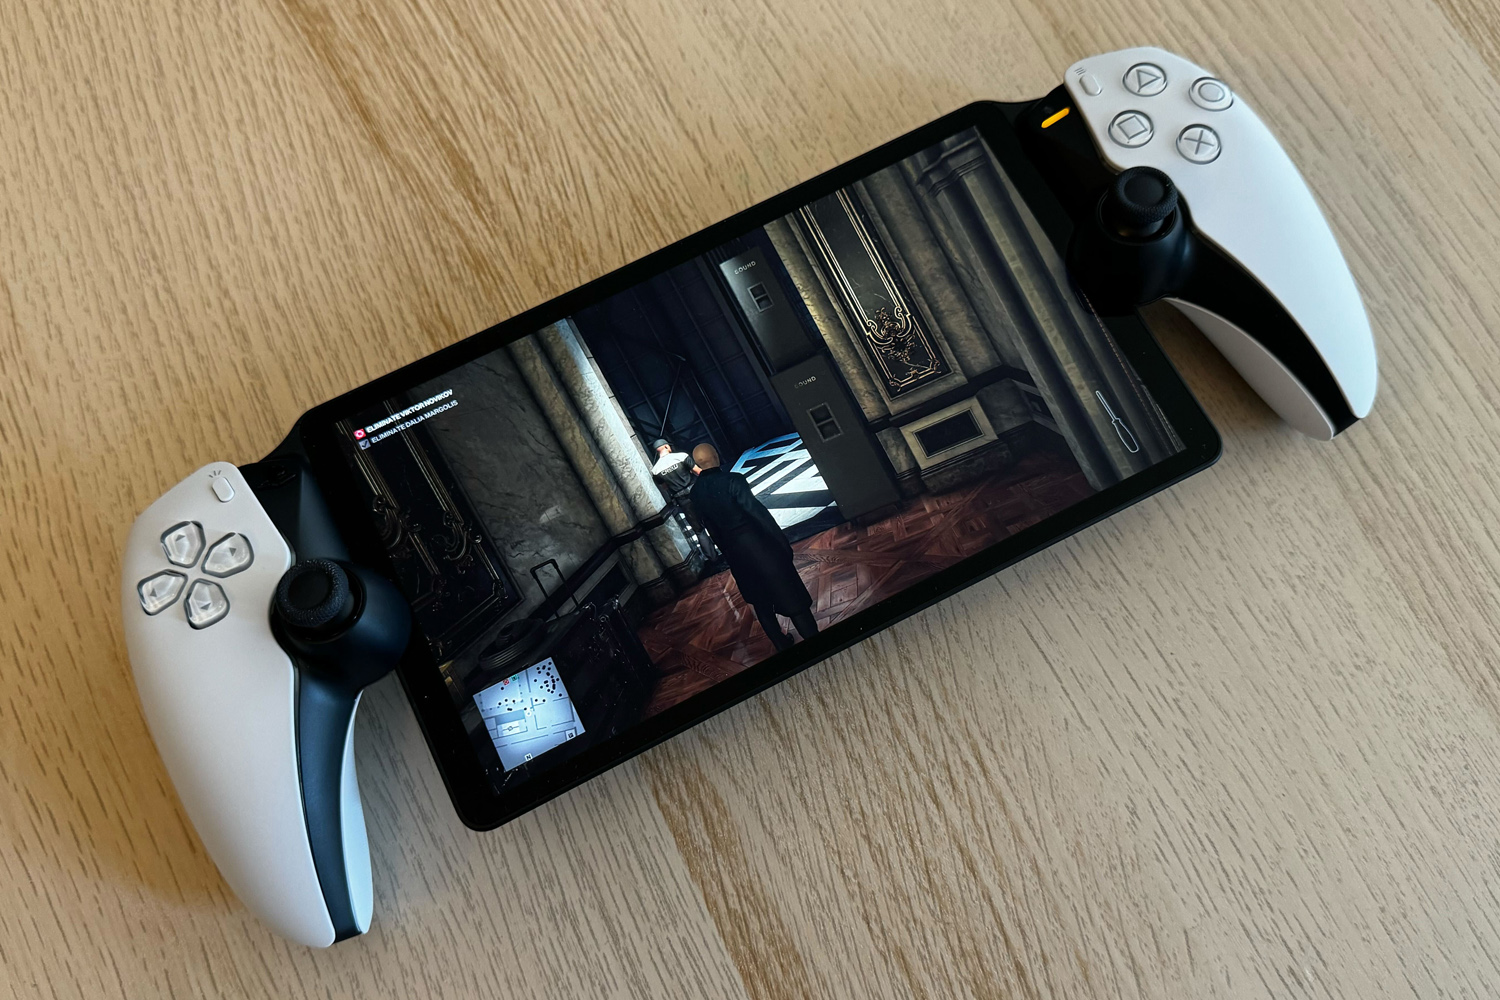 Sony PlayStation Portal Review